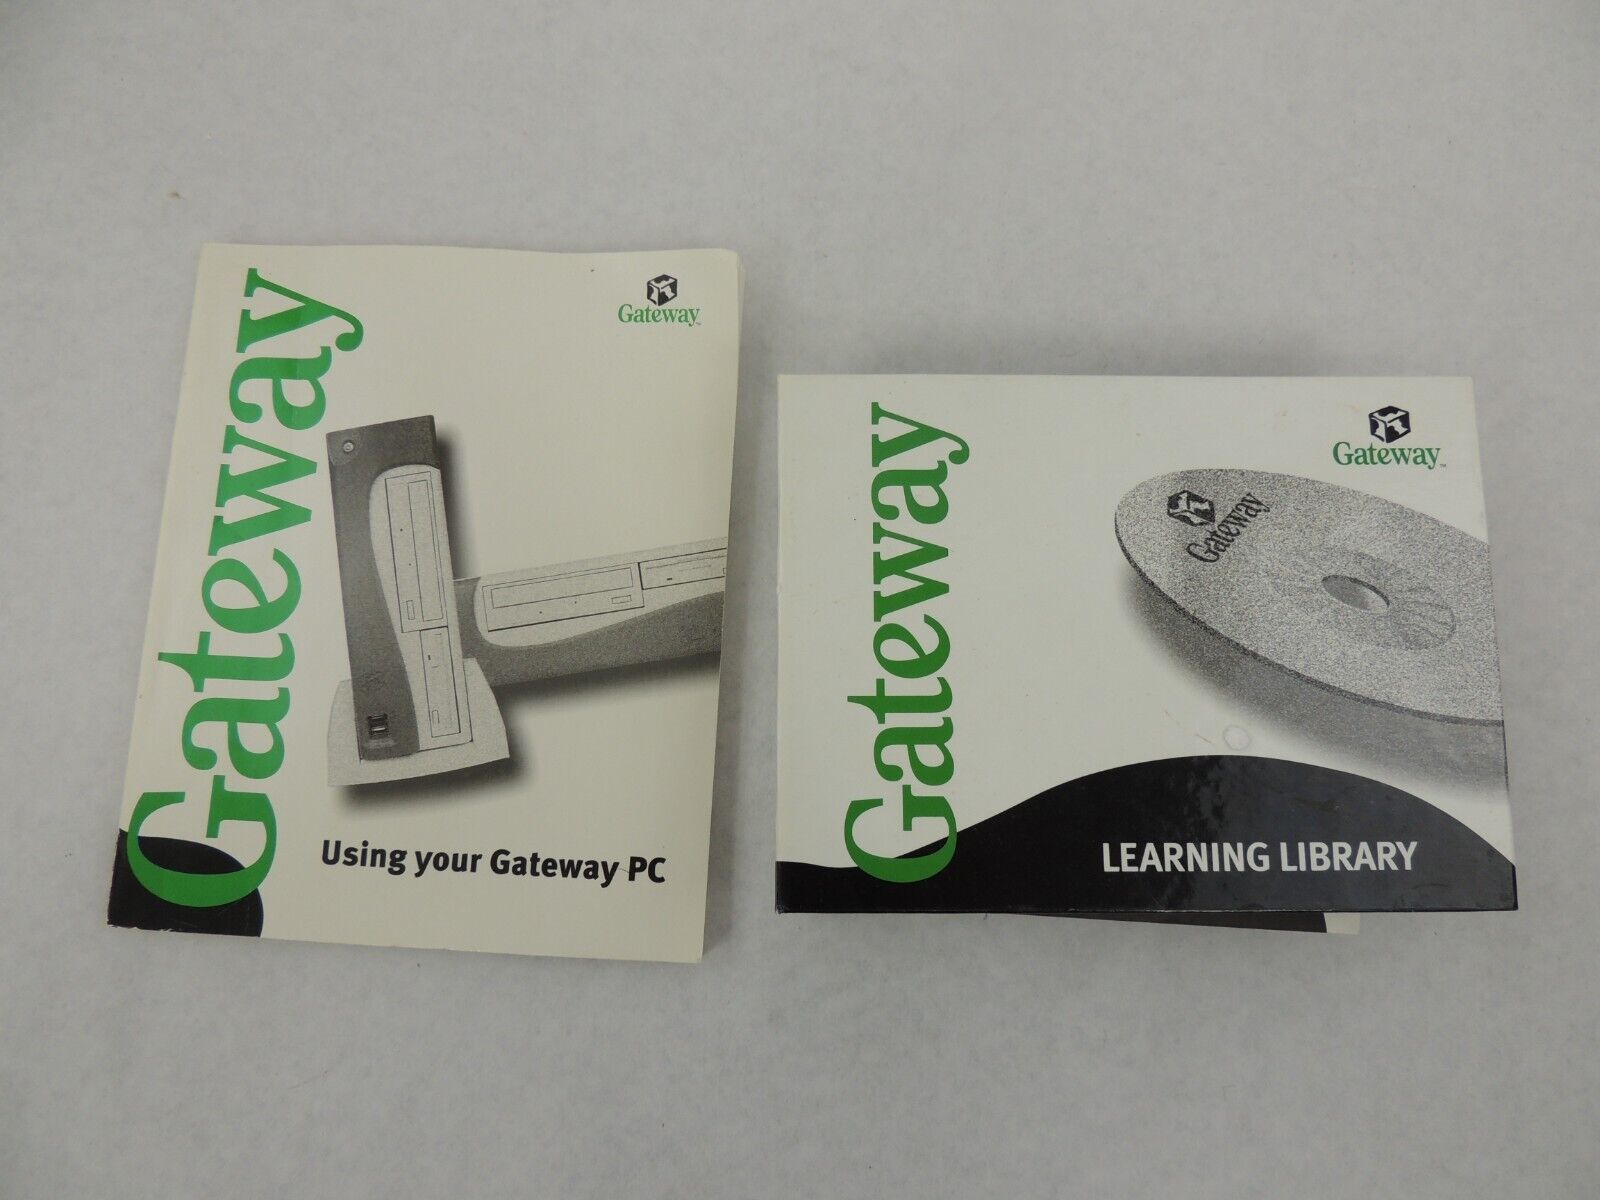 USING YOUR GATEWAY PC BOOK AND LEARNING LIBRARY